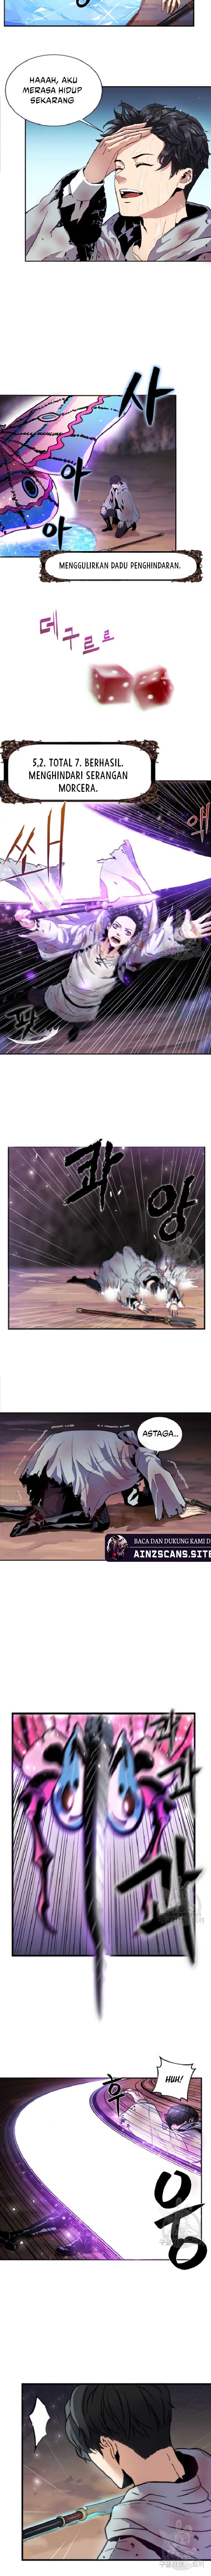 the-strongest-useless-princes-battle-for-the-throne Chapter chapter-02